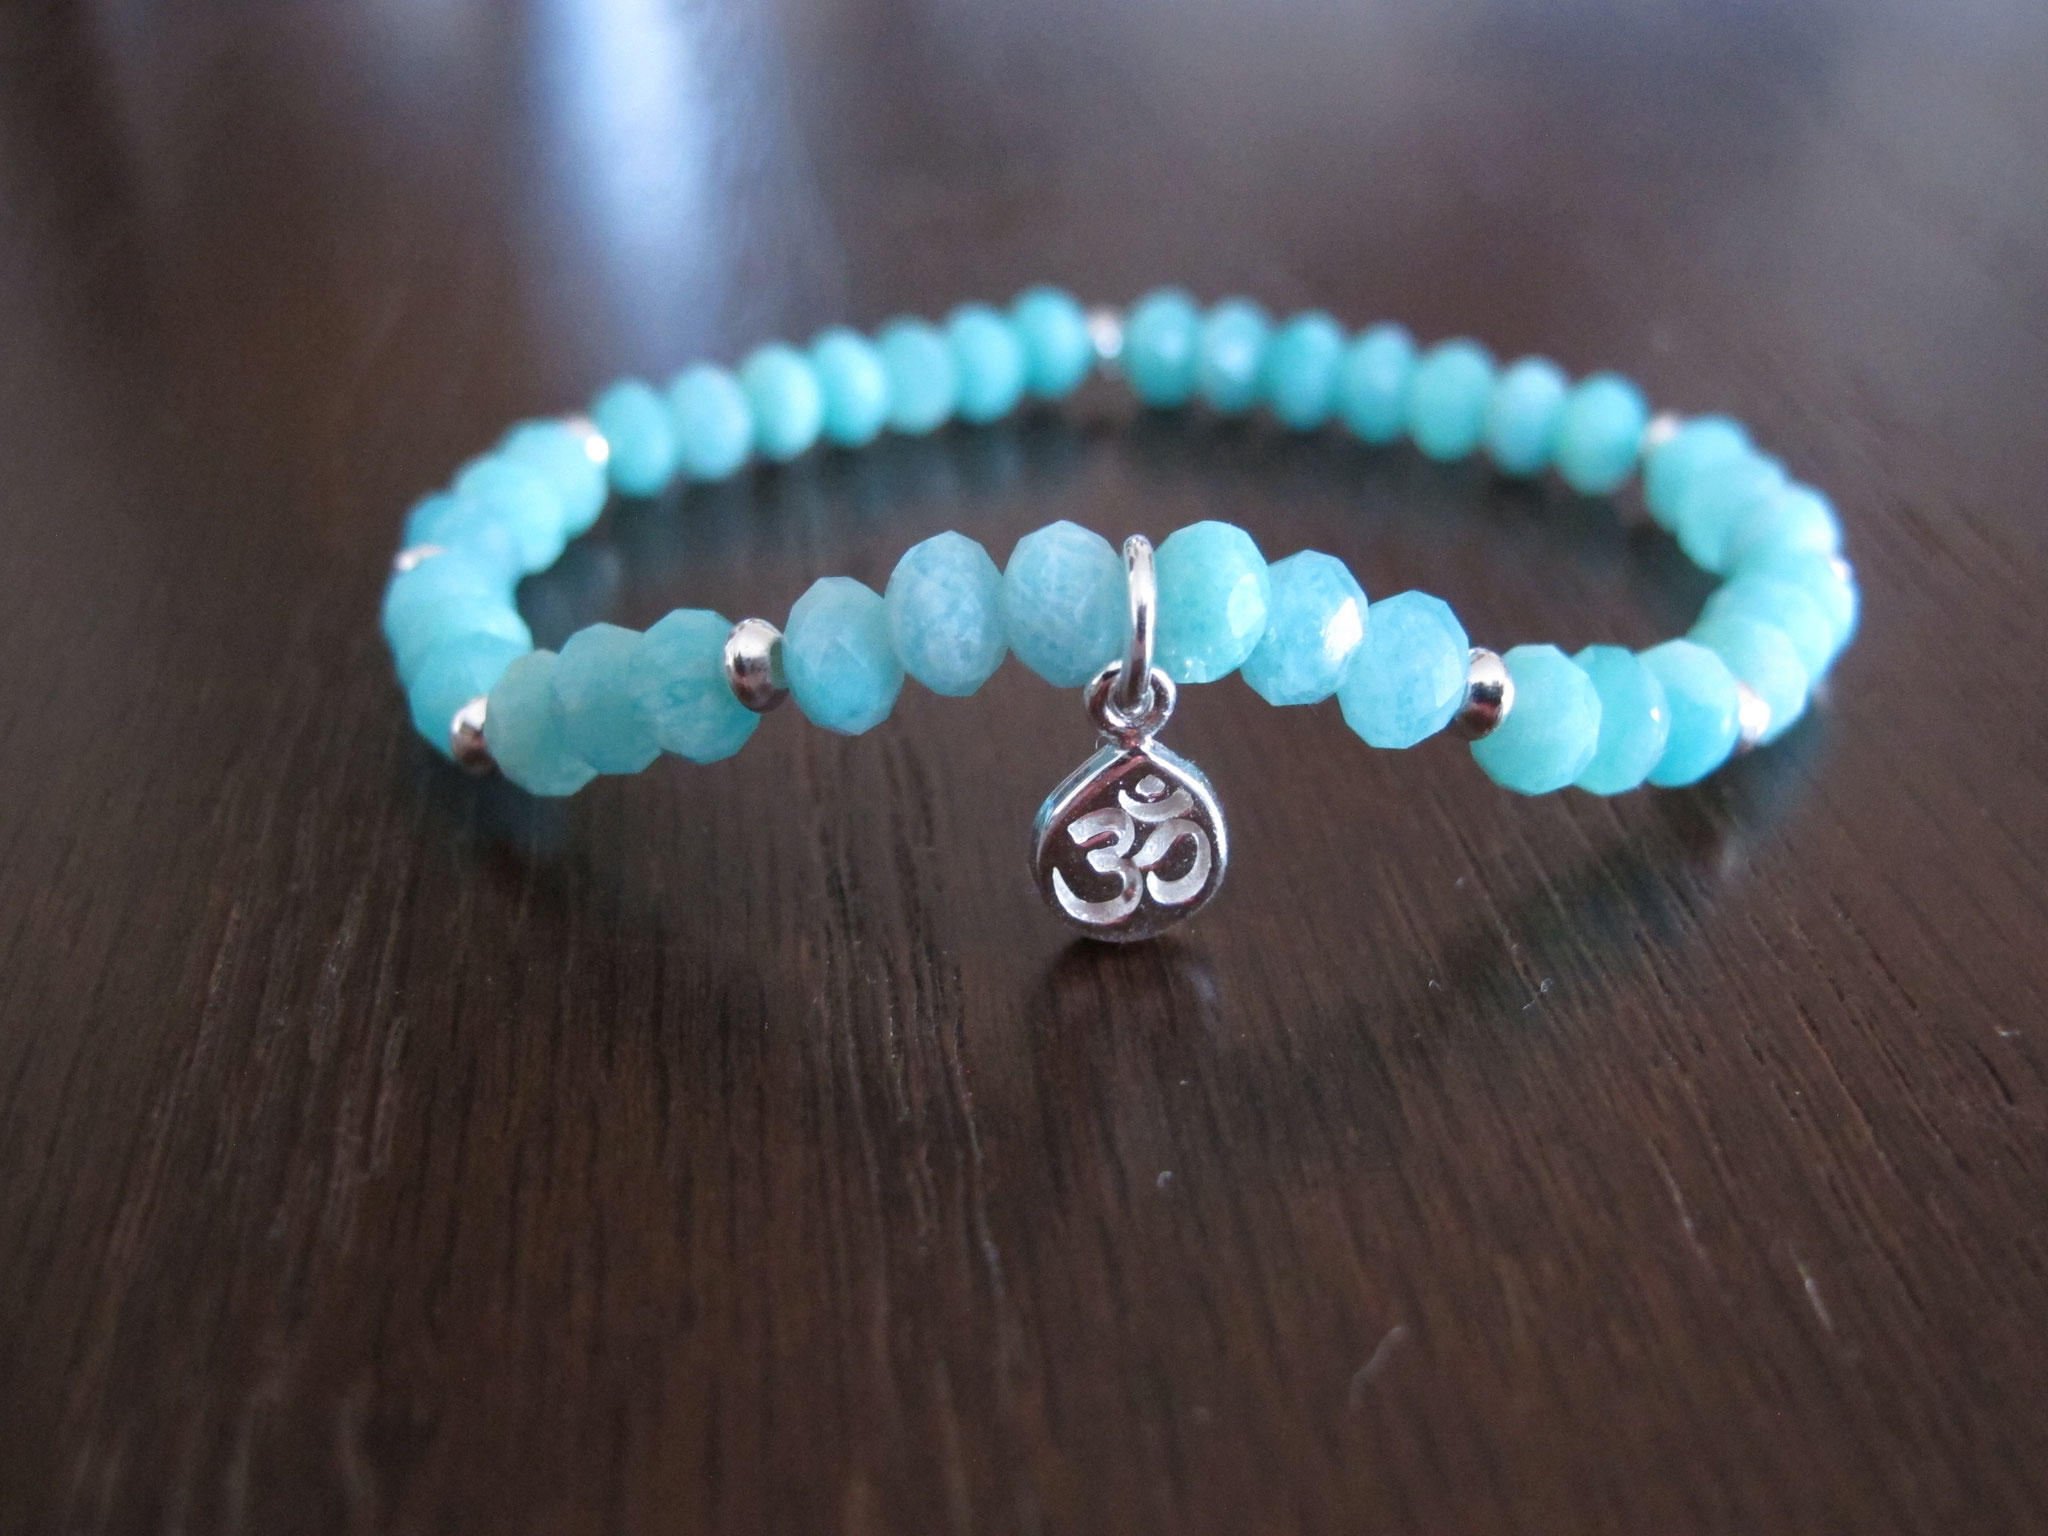 Faceted amazonite beads with a 925 Sterling silver "OM" charm